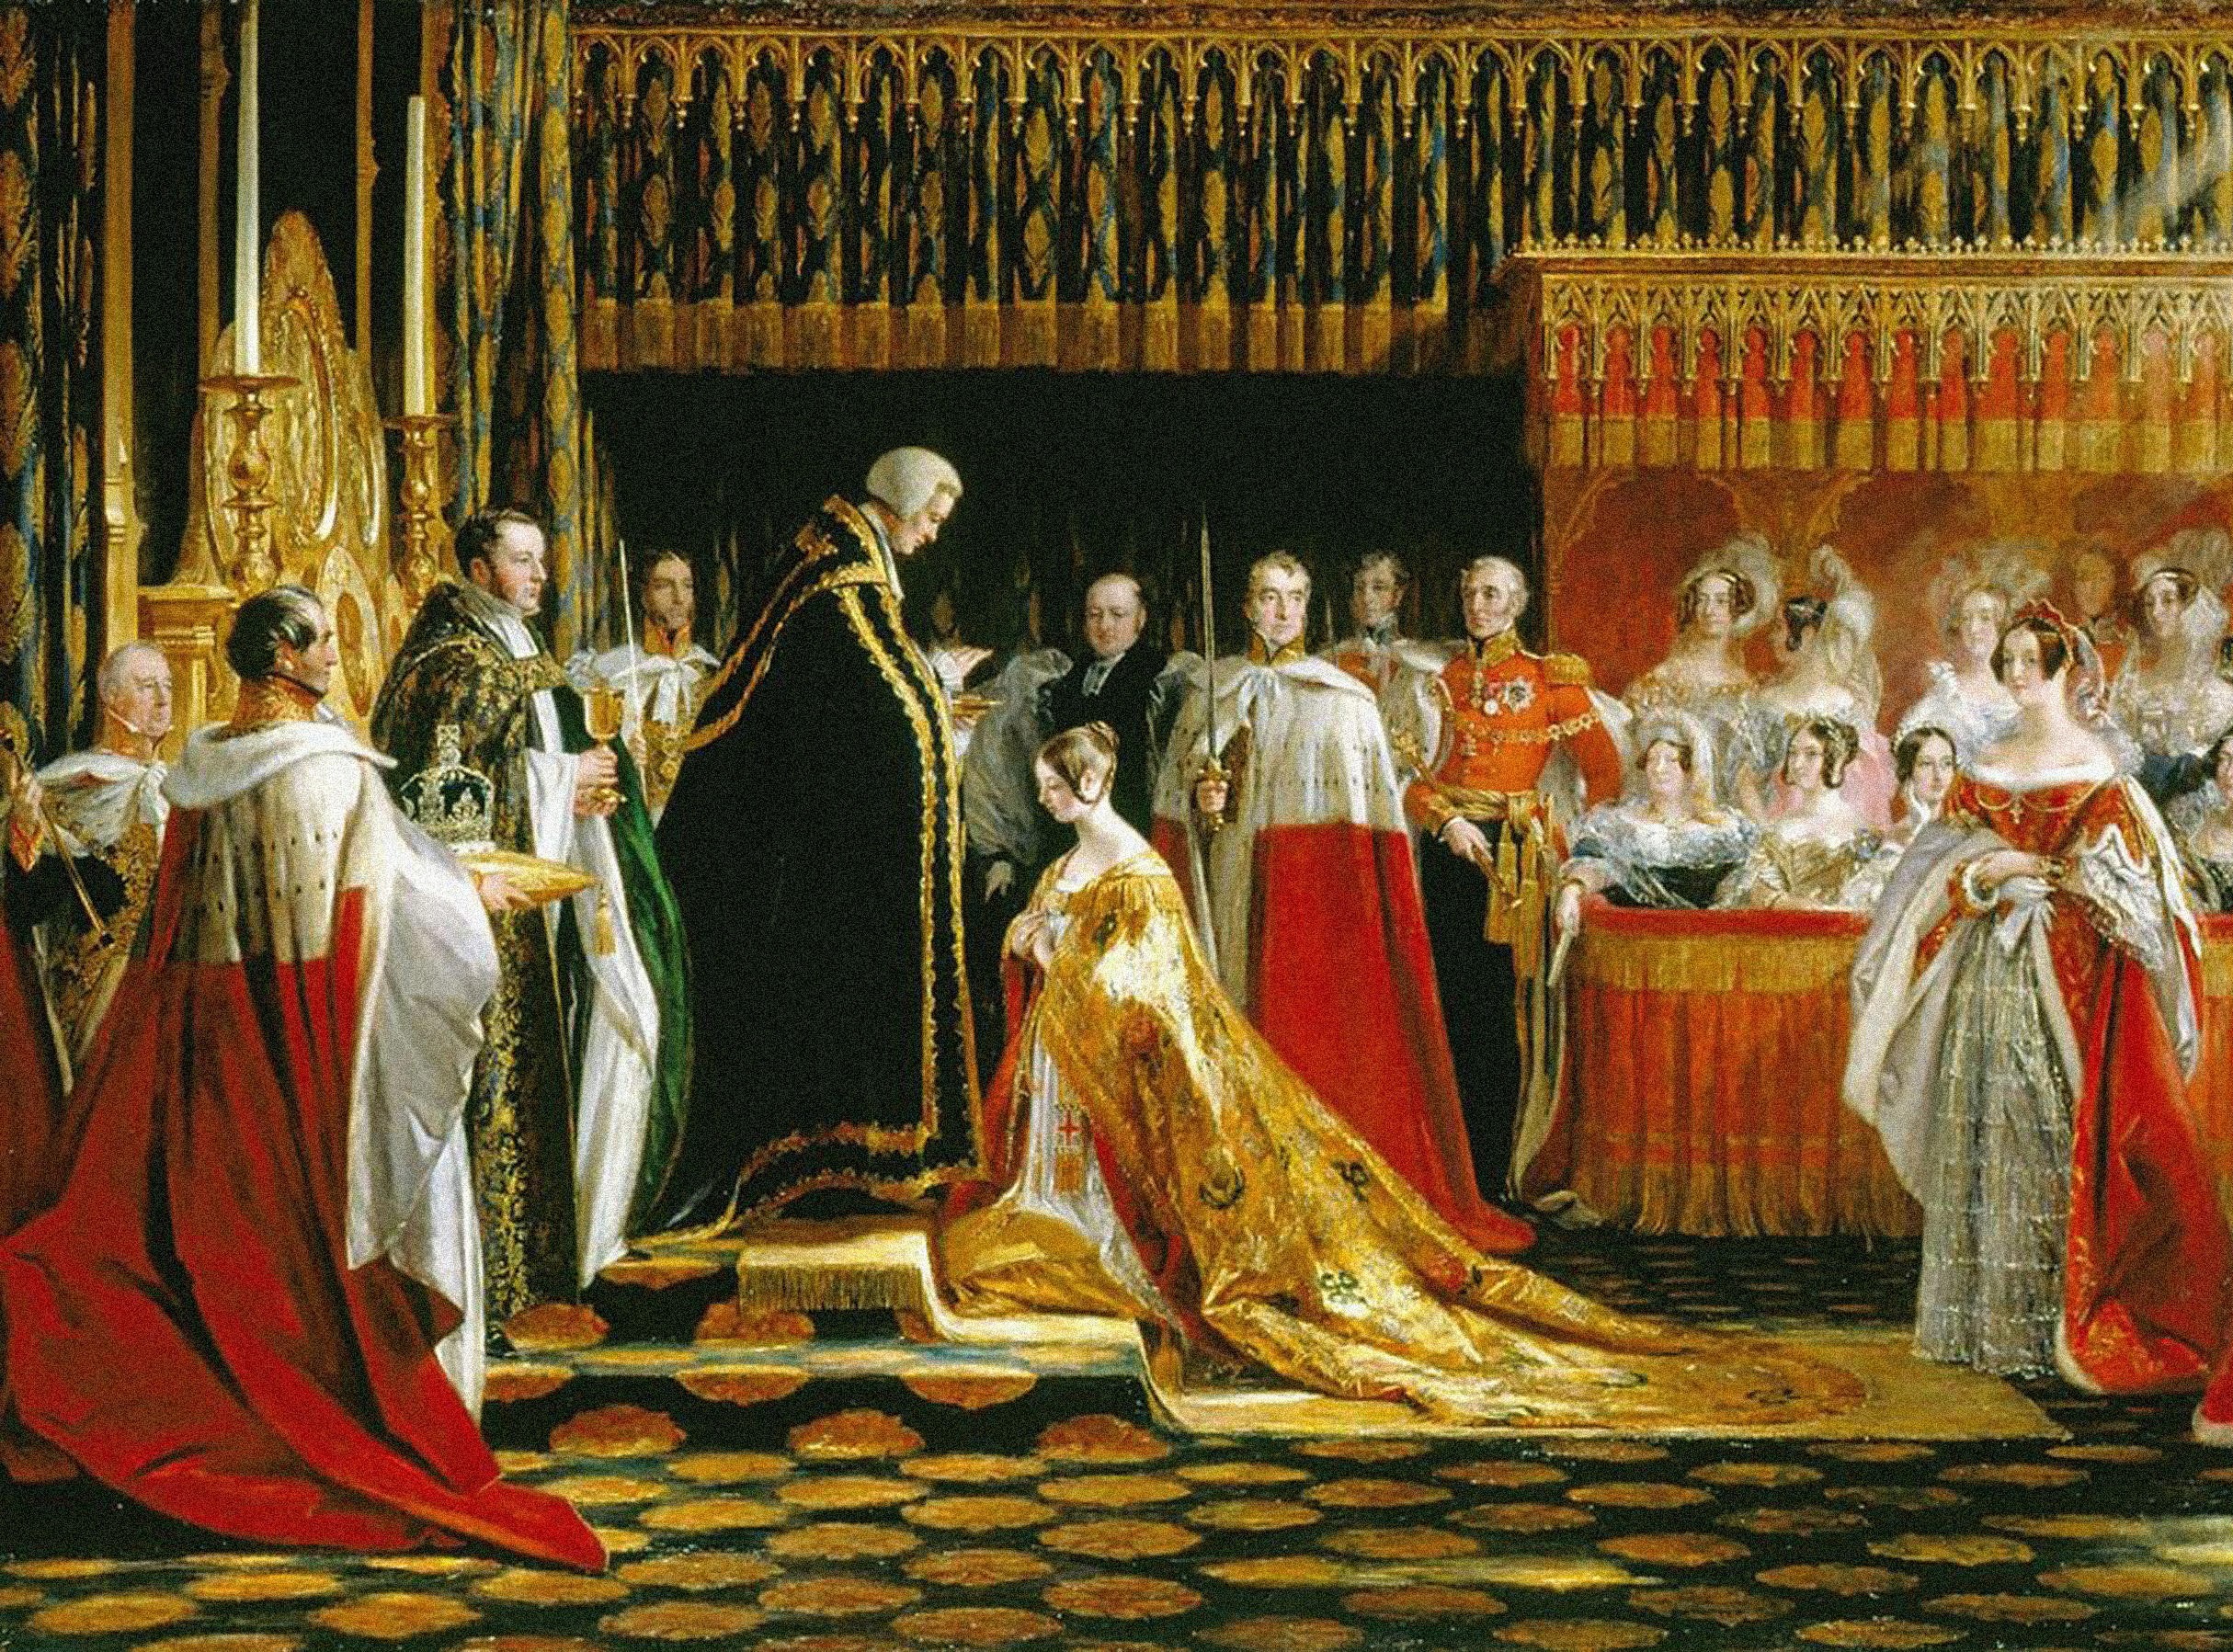 Queen Victoria Receiving the Sacrament at her Coronation in 1838 